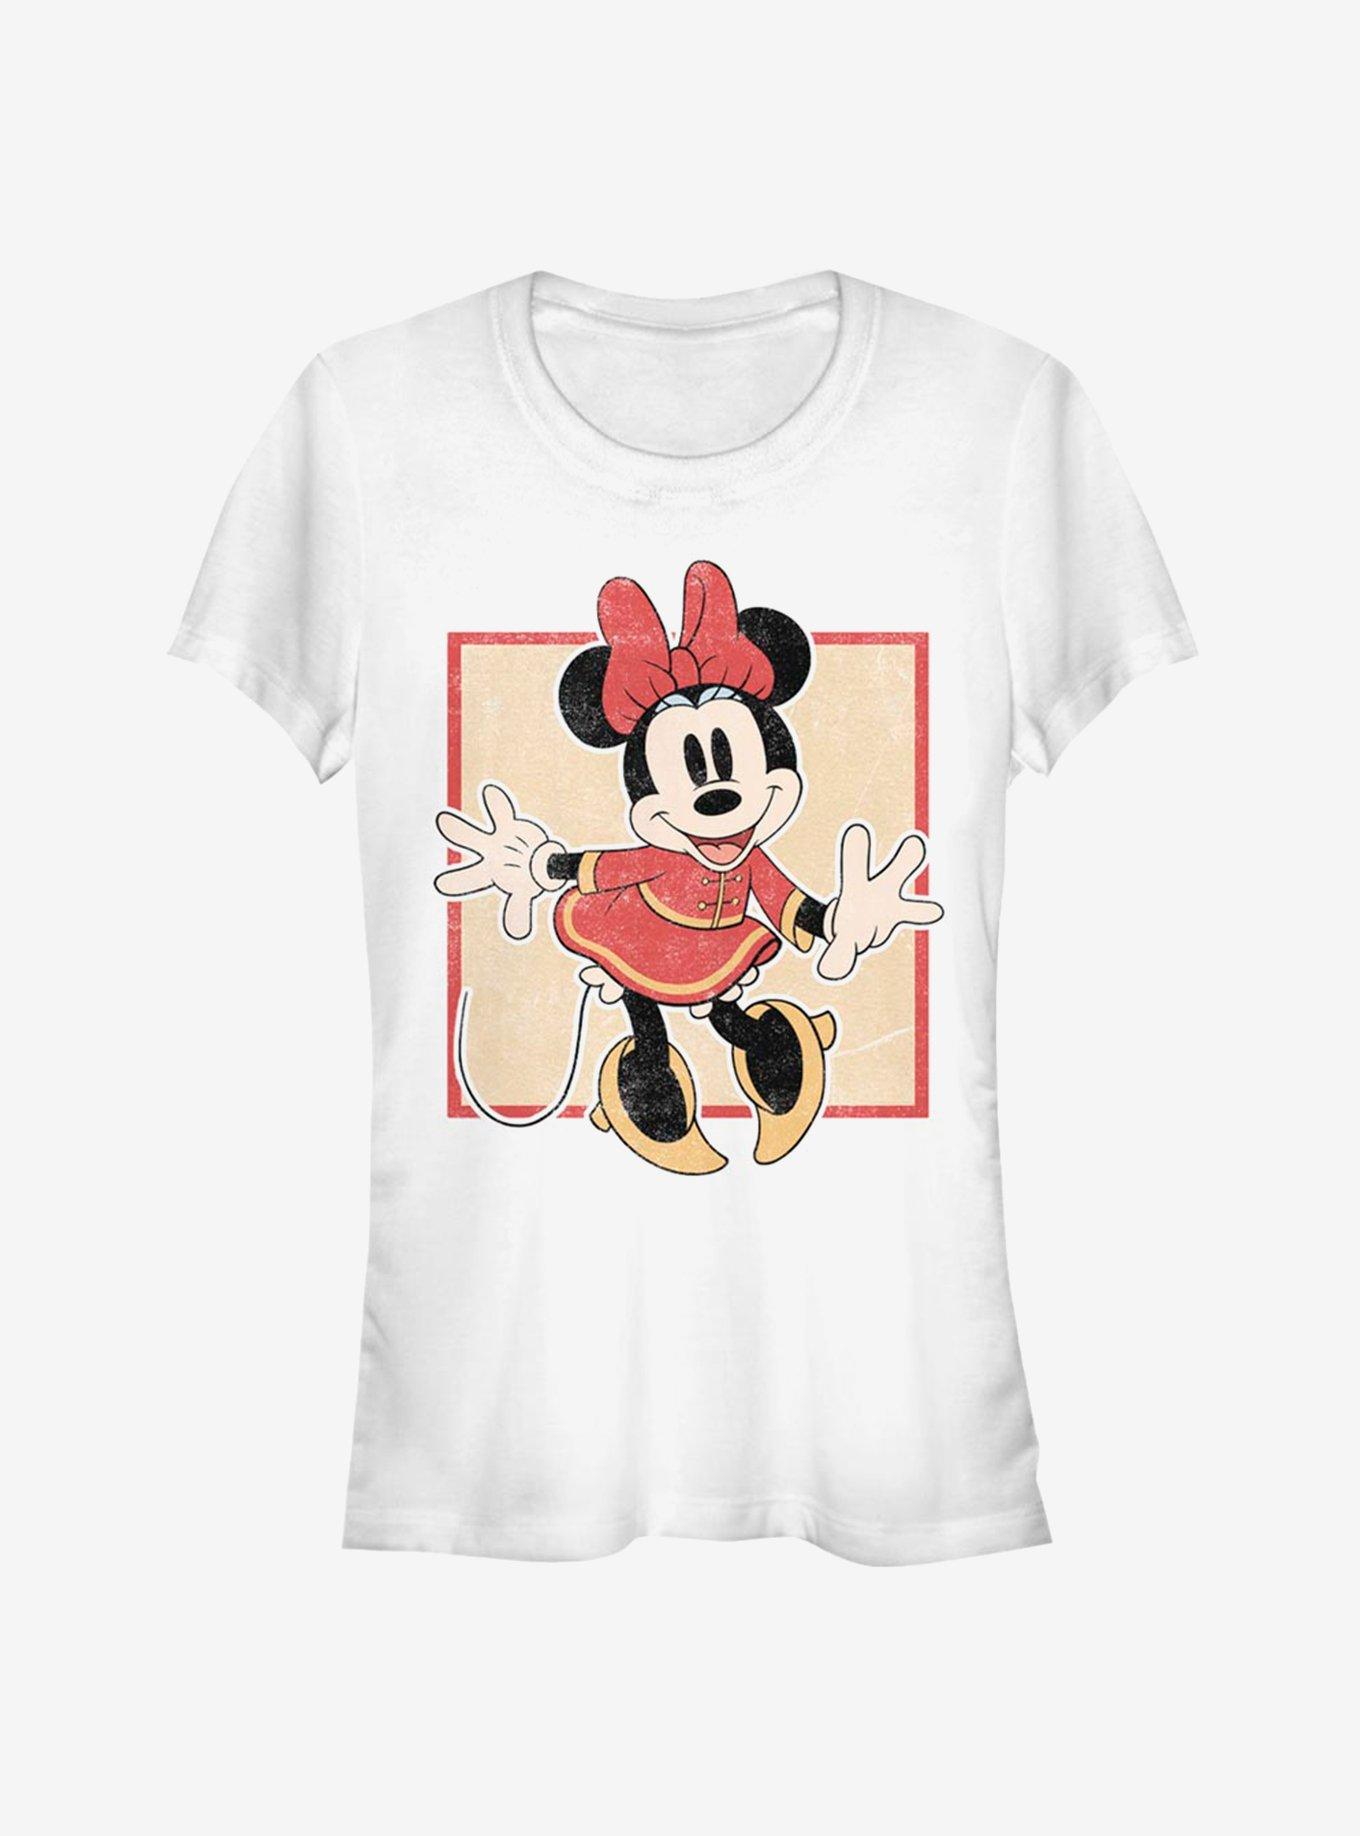 Minnie Mouse Chinese Classic Girls T-Shirt - WHITE | Hot Topic